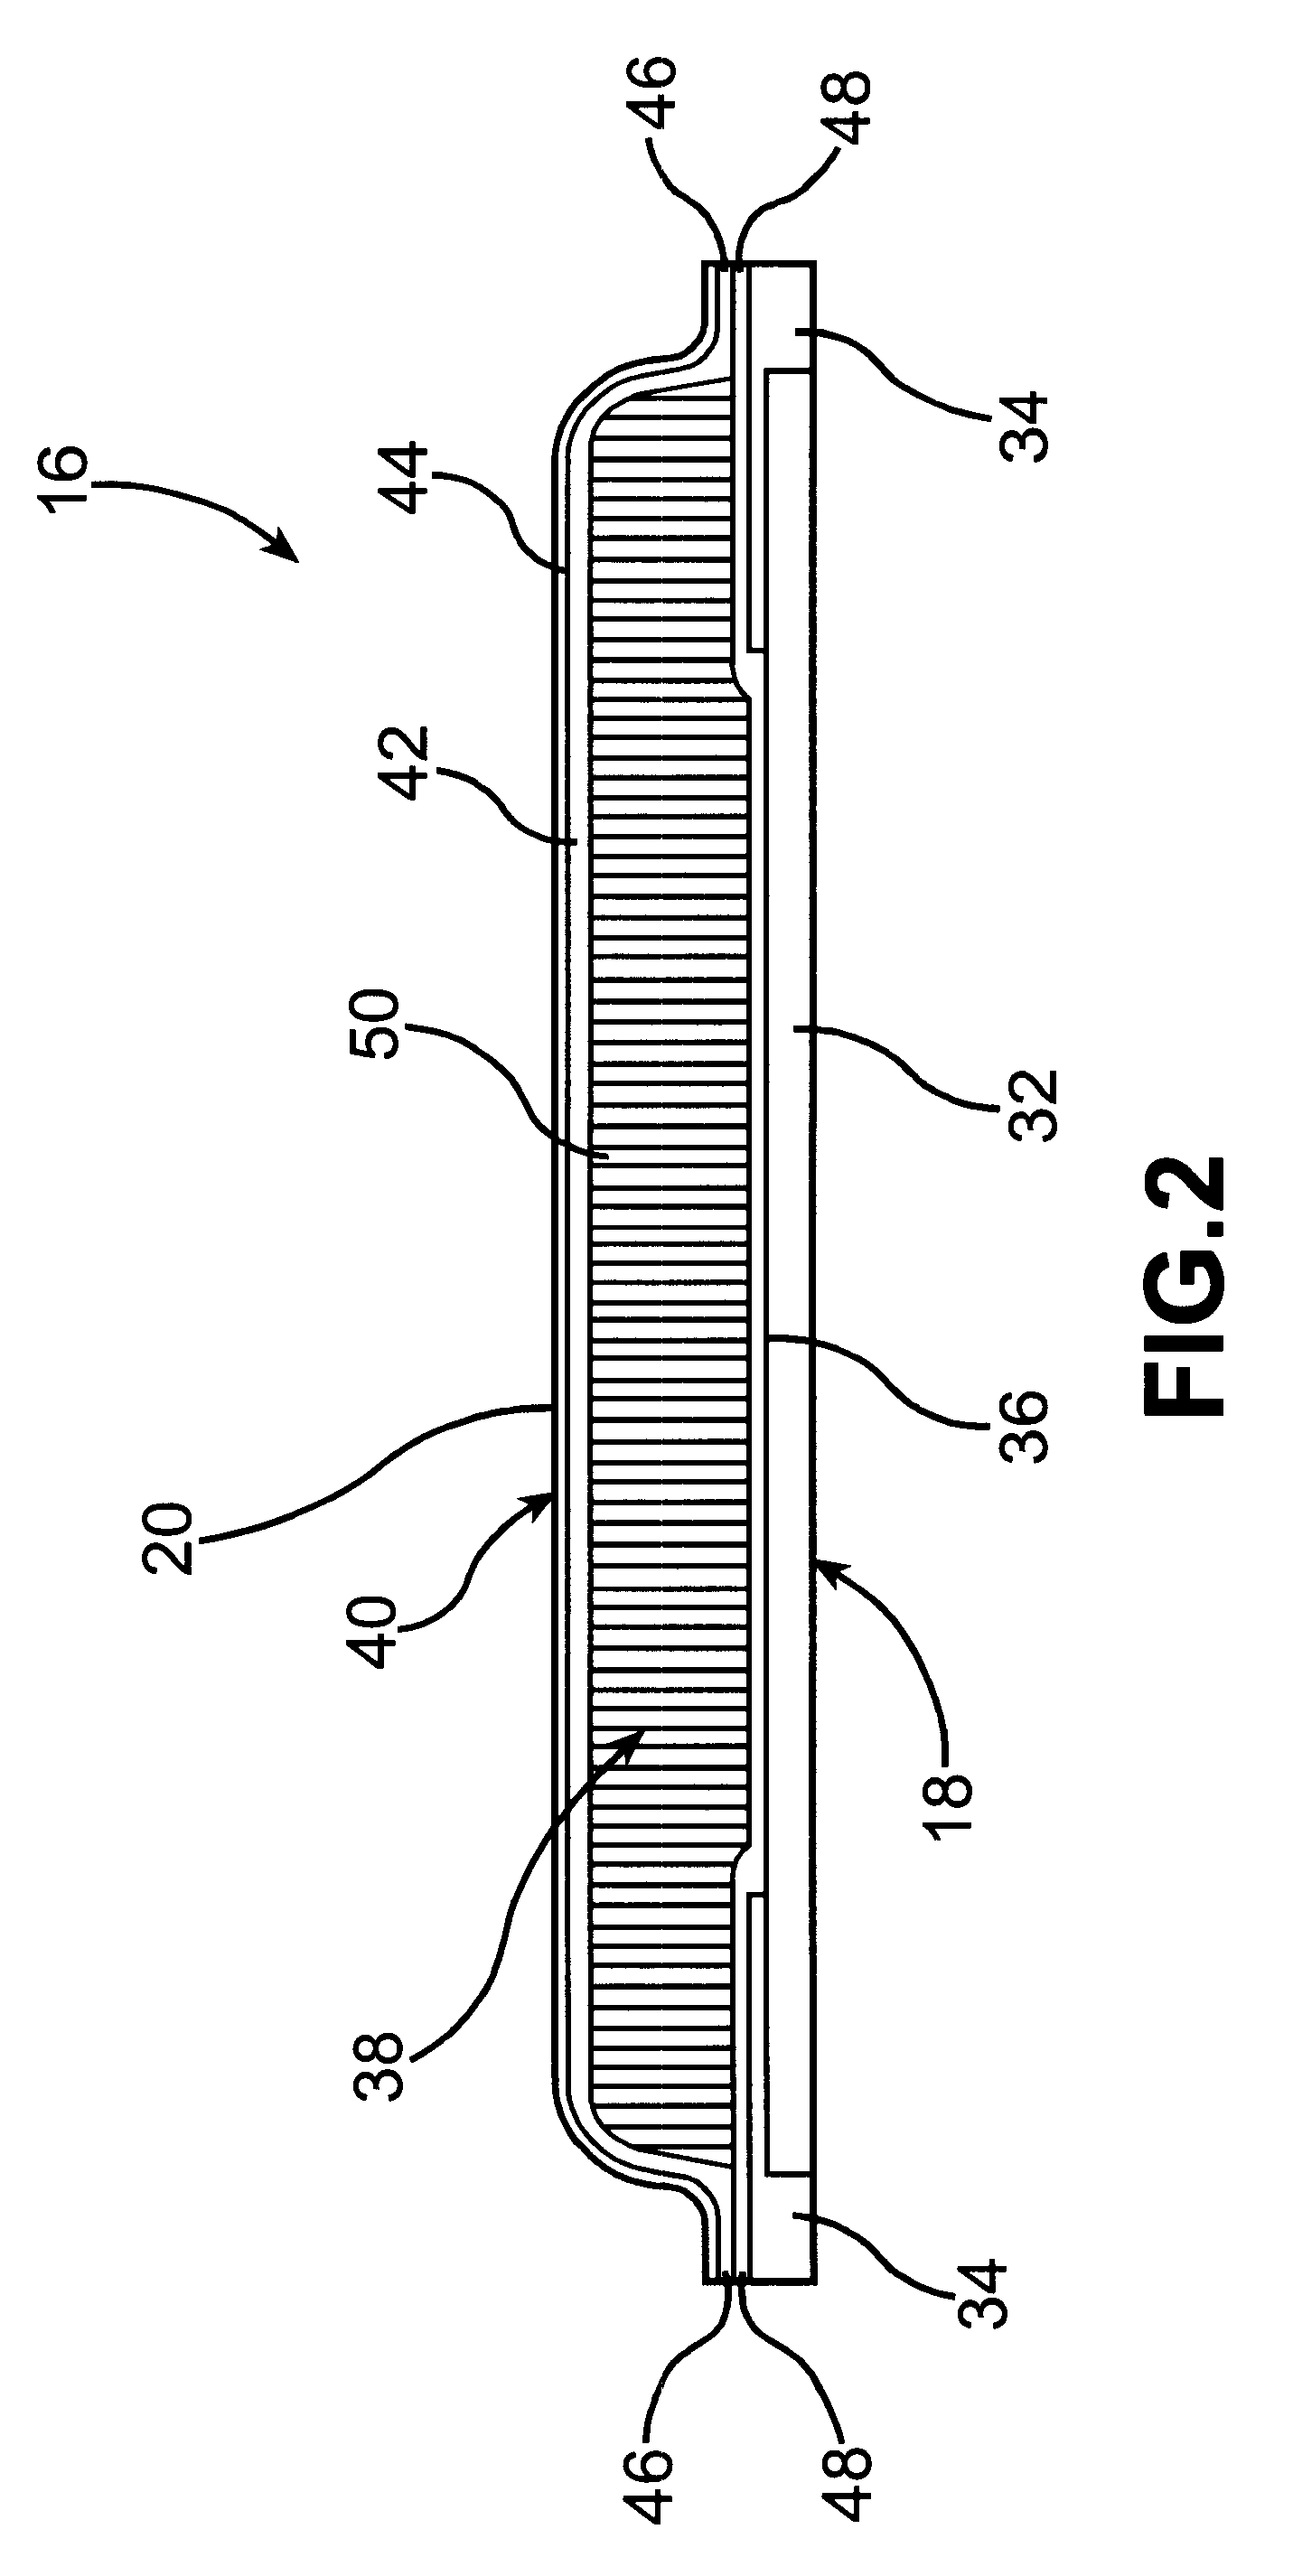 Method of making a snowboard having improved turning performance